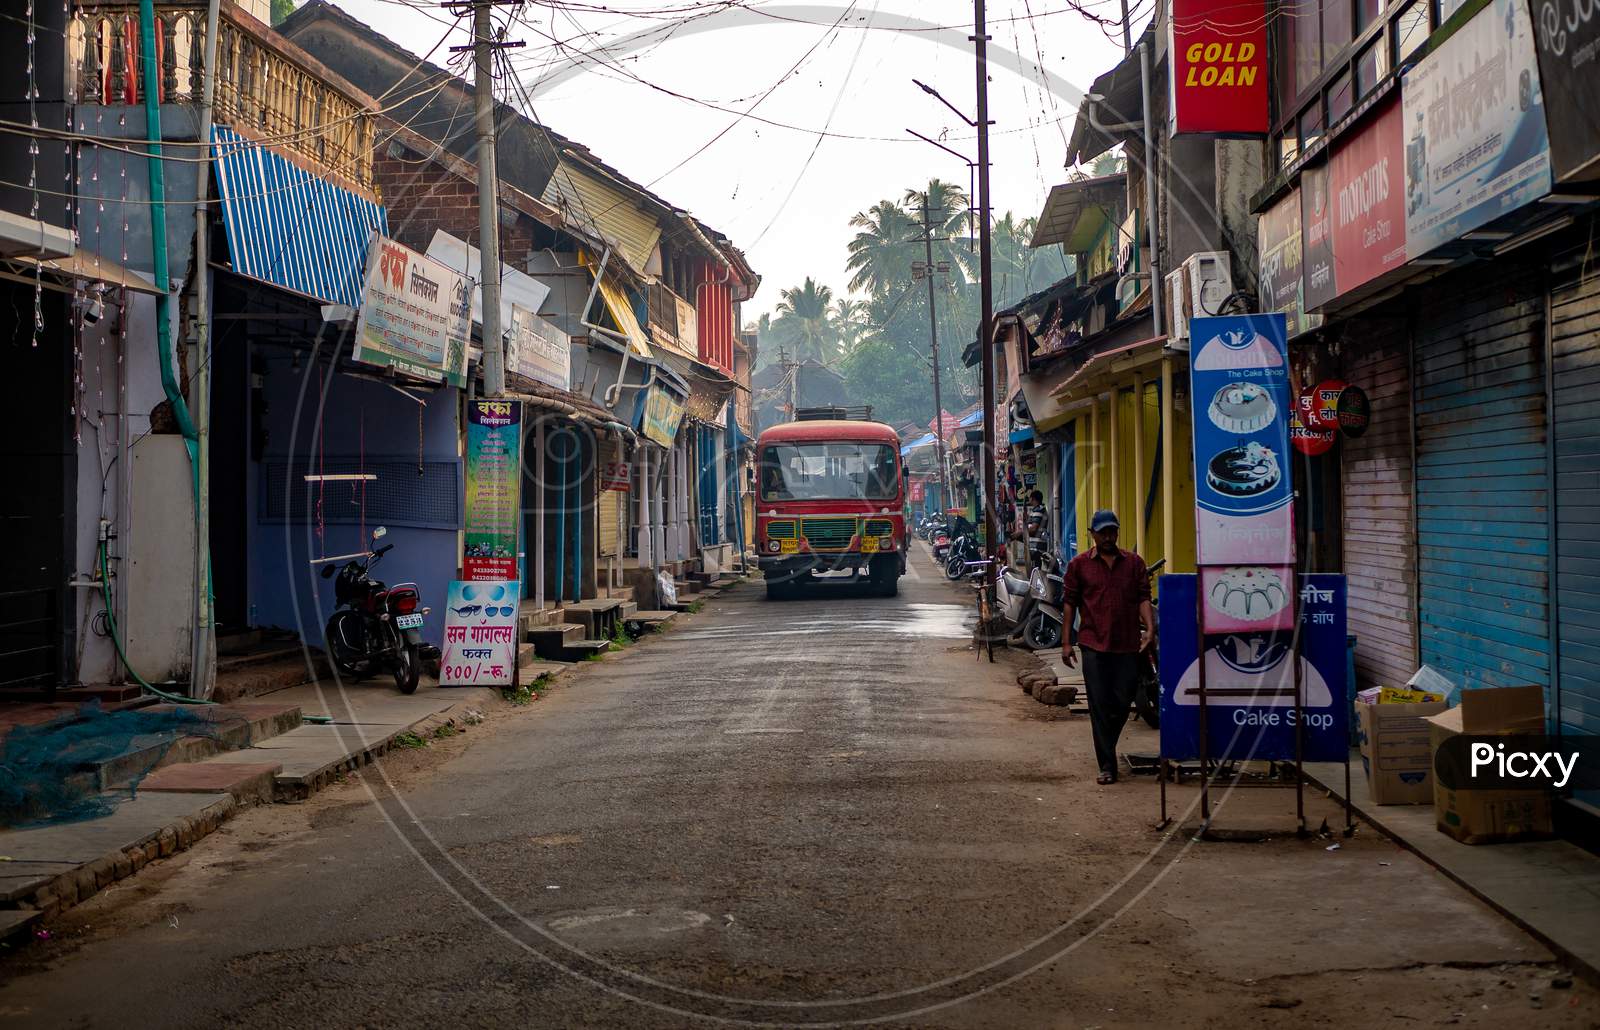 Local Public Transport Bus Running On A Small Street Of A Village In Maharashtra